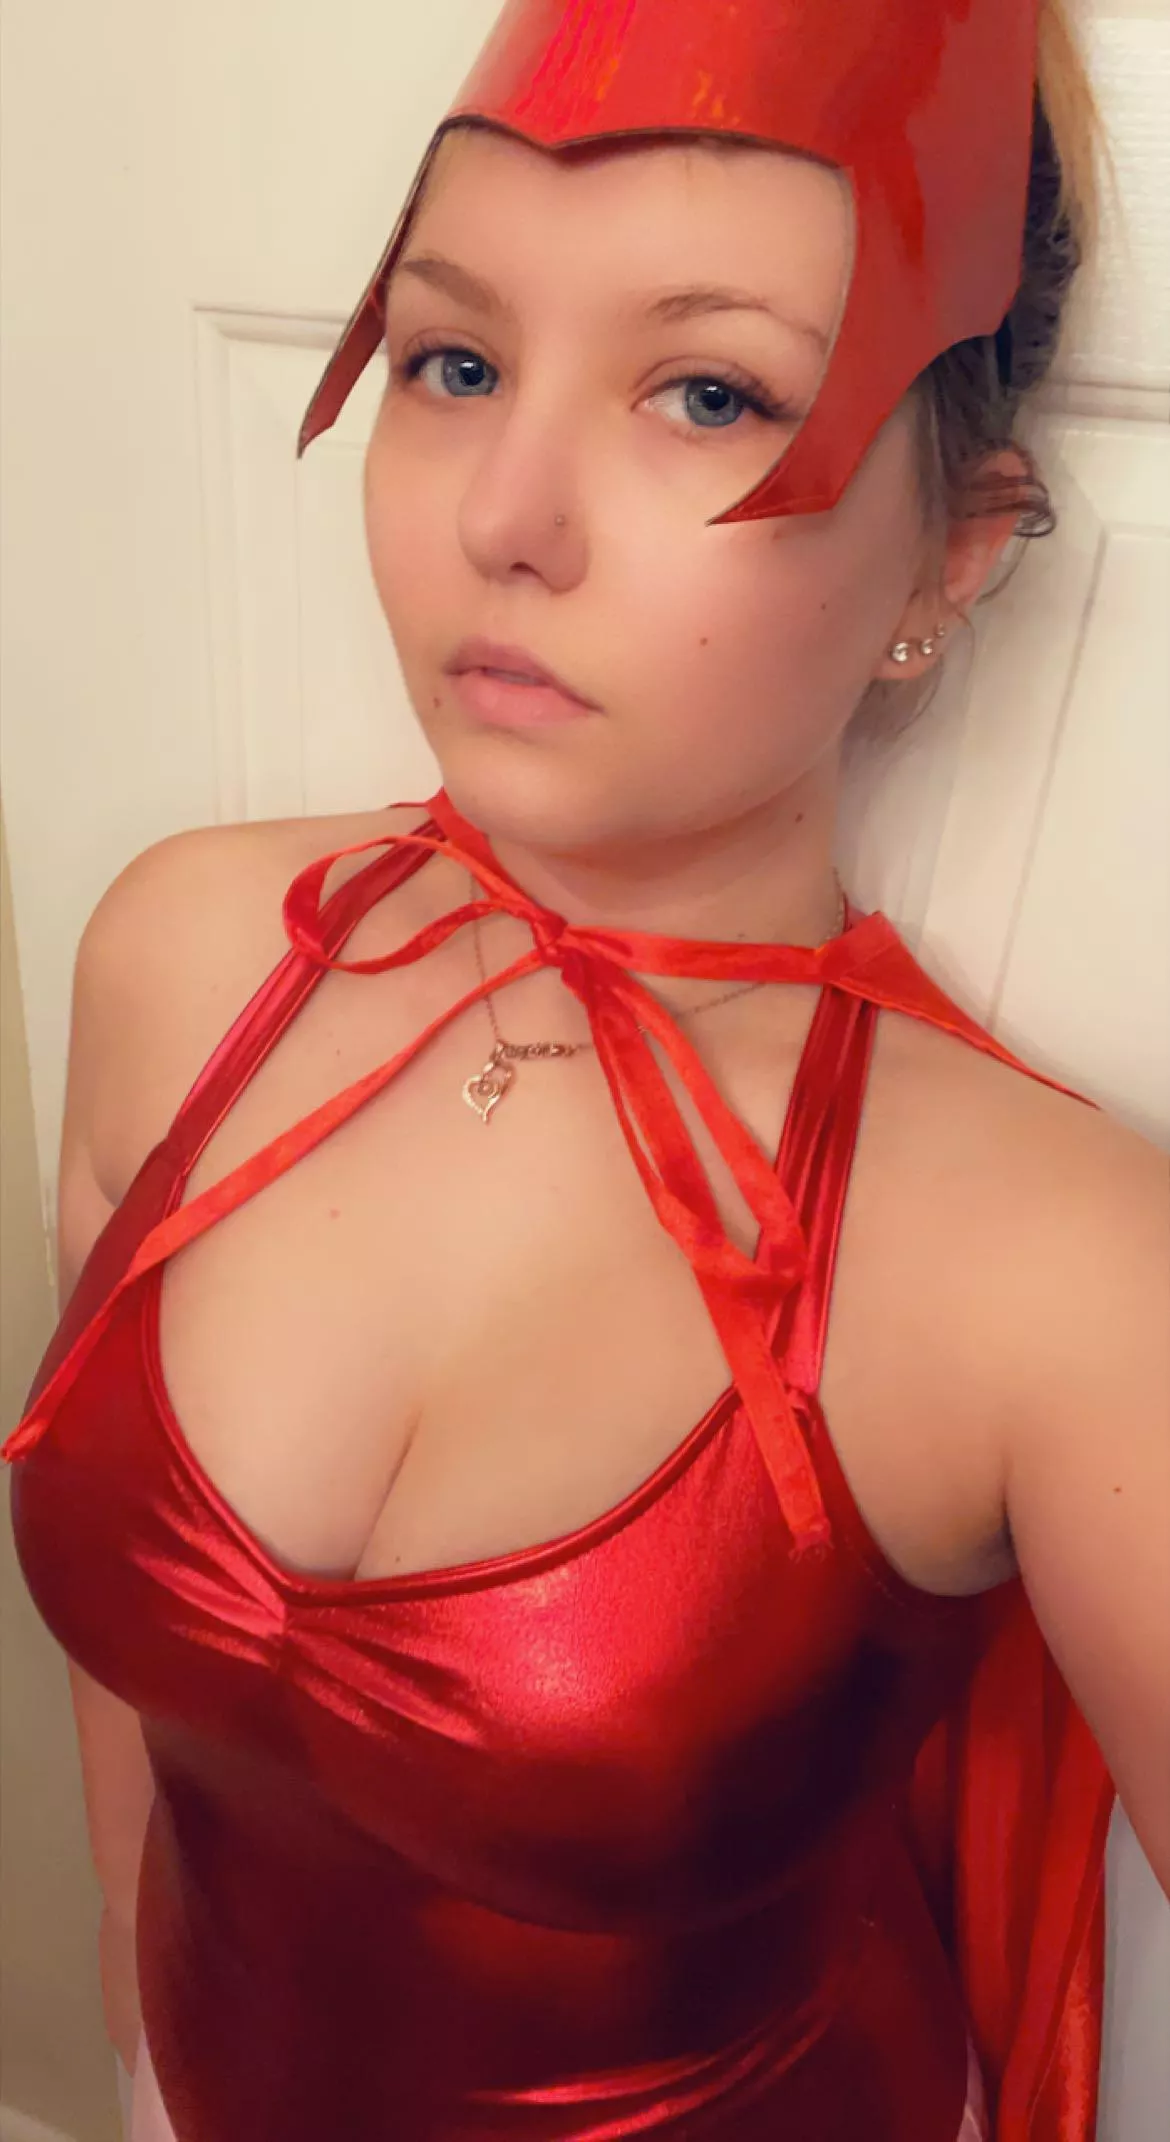 My Scarlet Witch Halloween costume came in nudes : cosplaygirls | NUDE-PICS .ORG